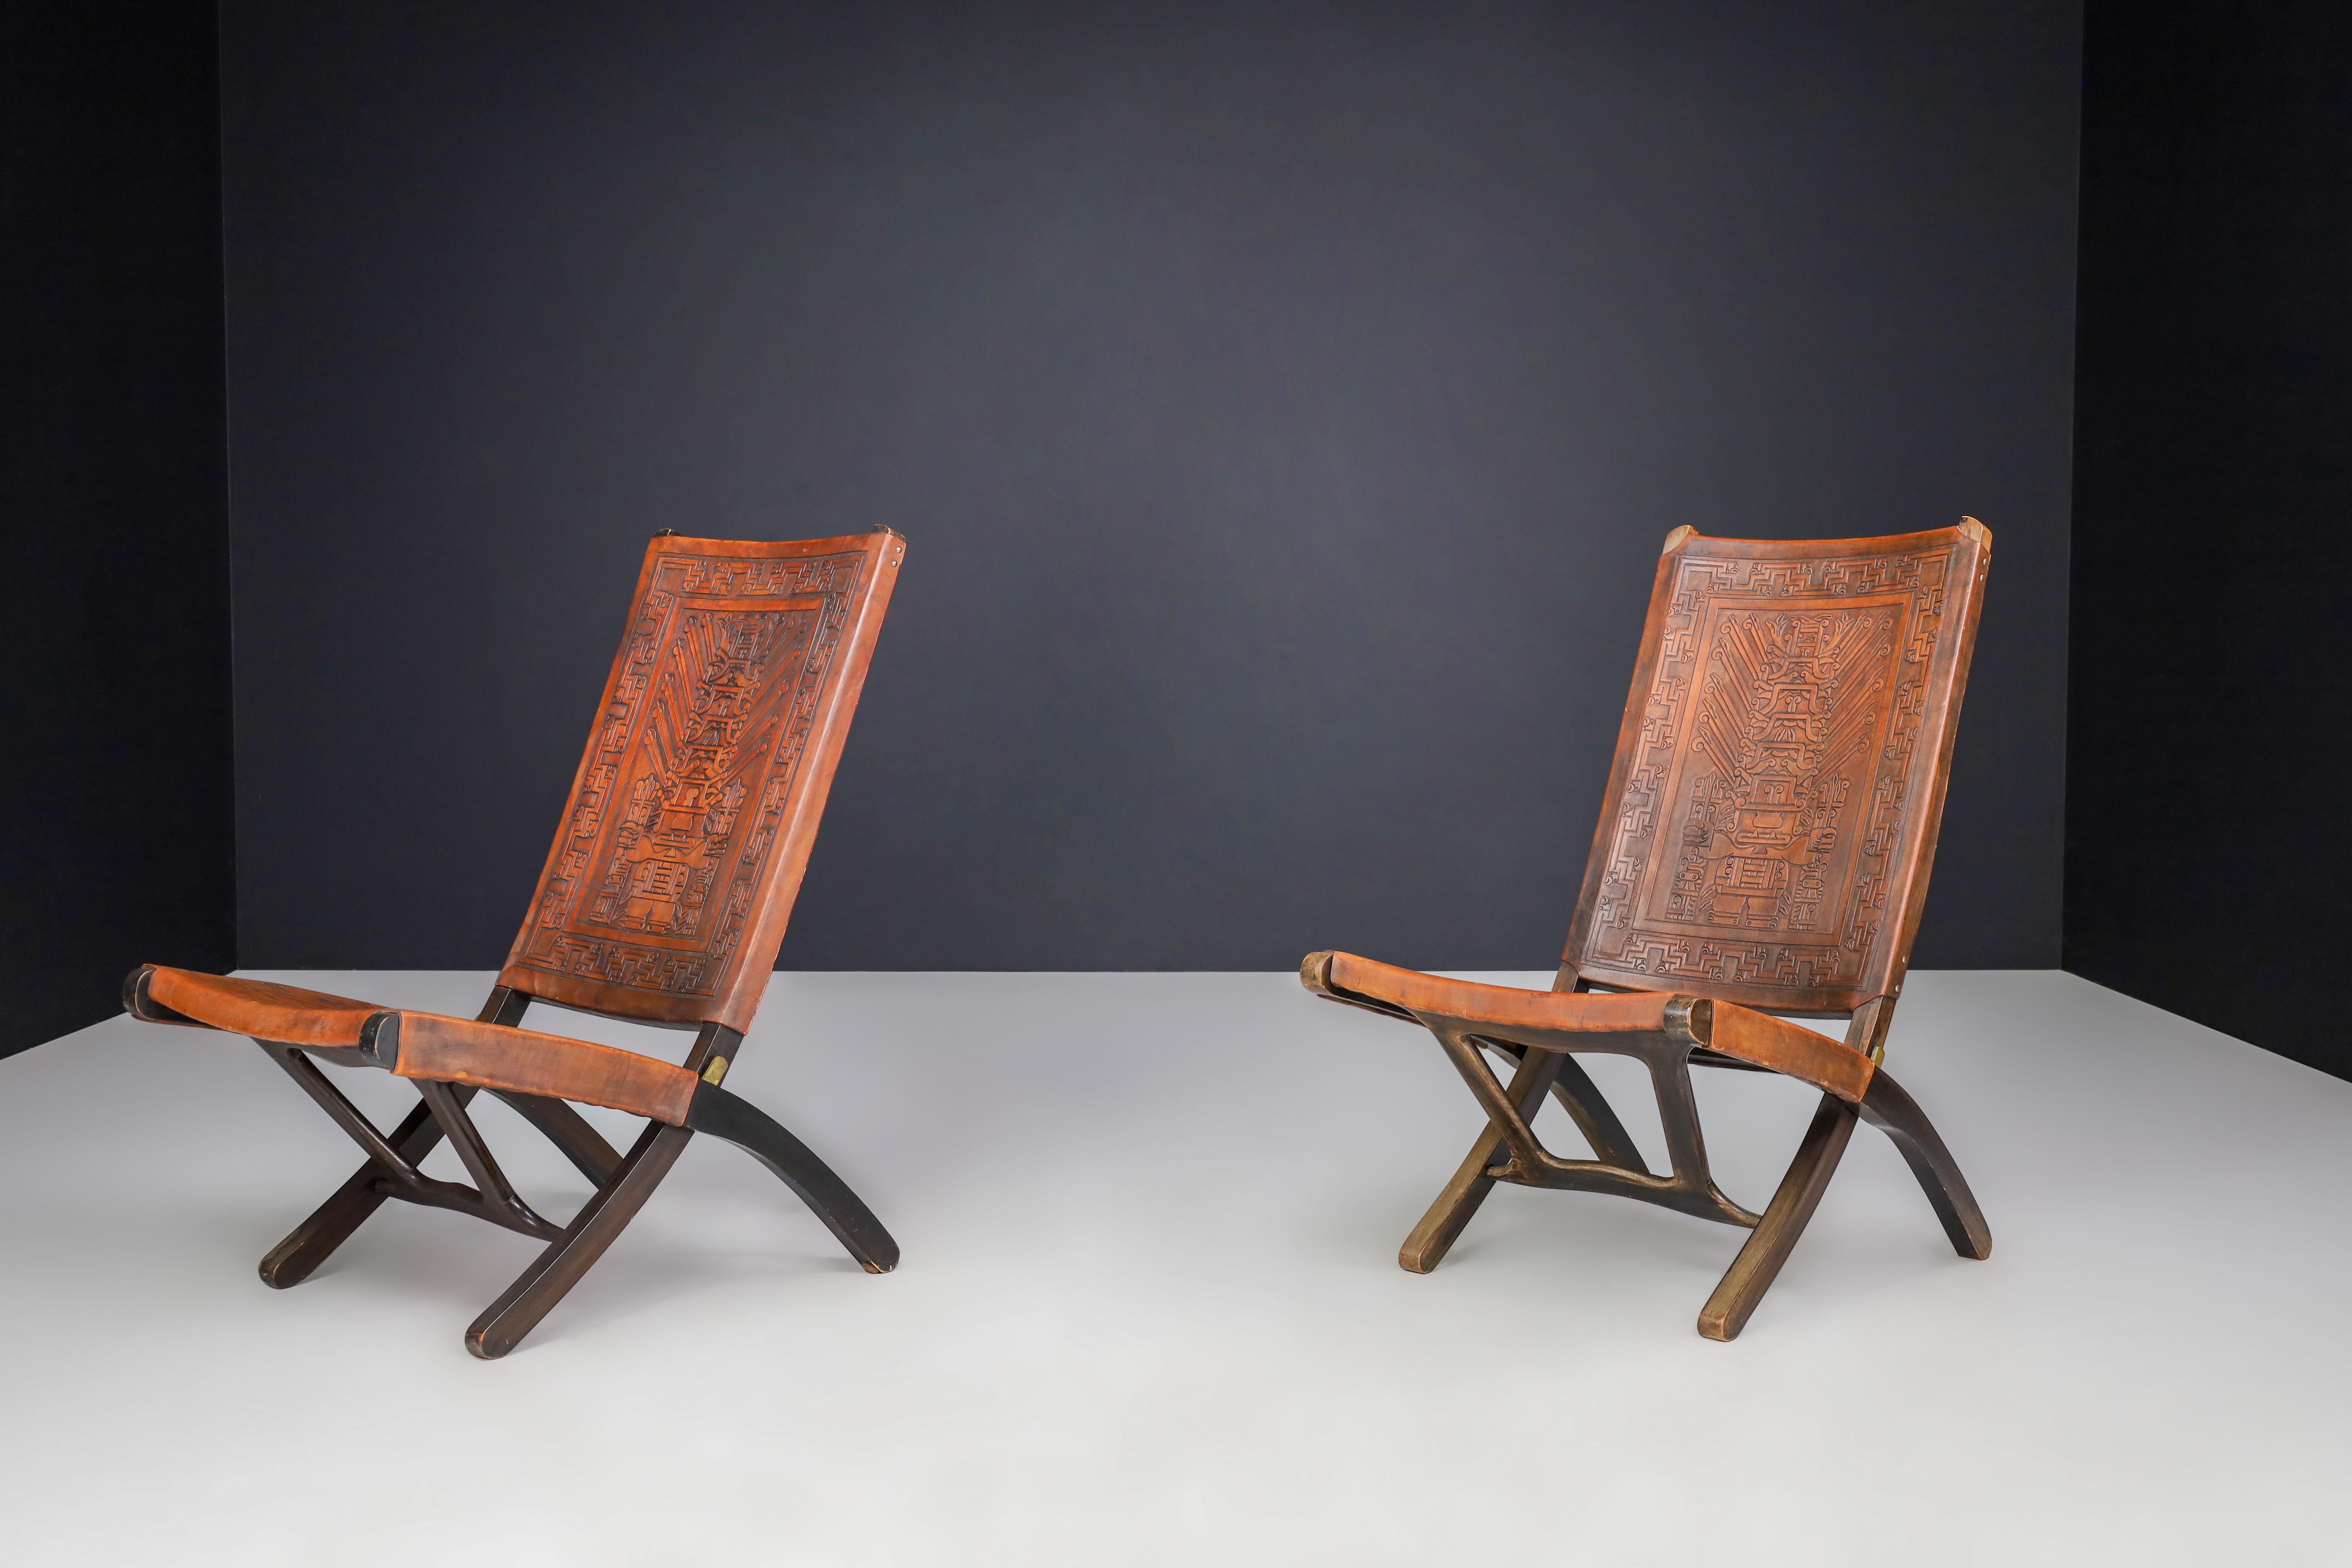 Angel I. Pazmino Cognac-colored Saddle Leather Folding Chairs Ecuador 1970s   For Sale 3